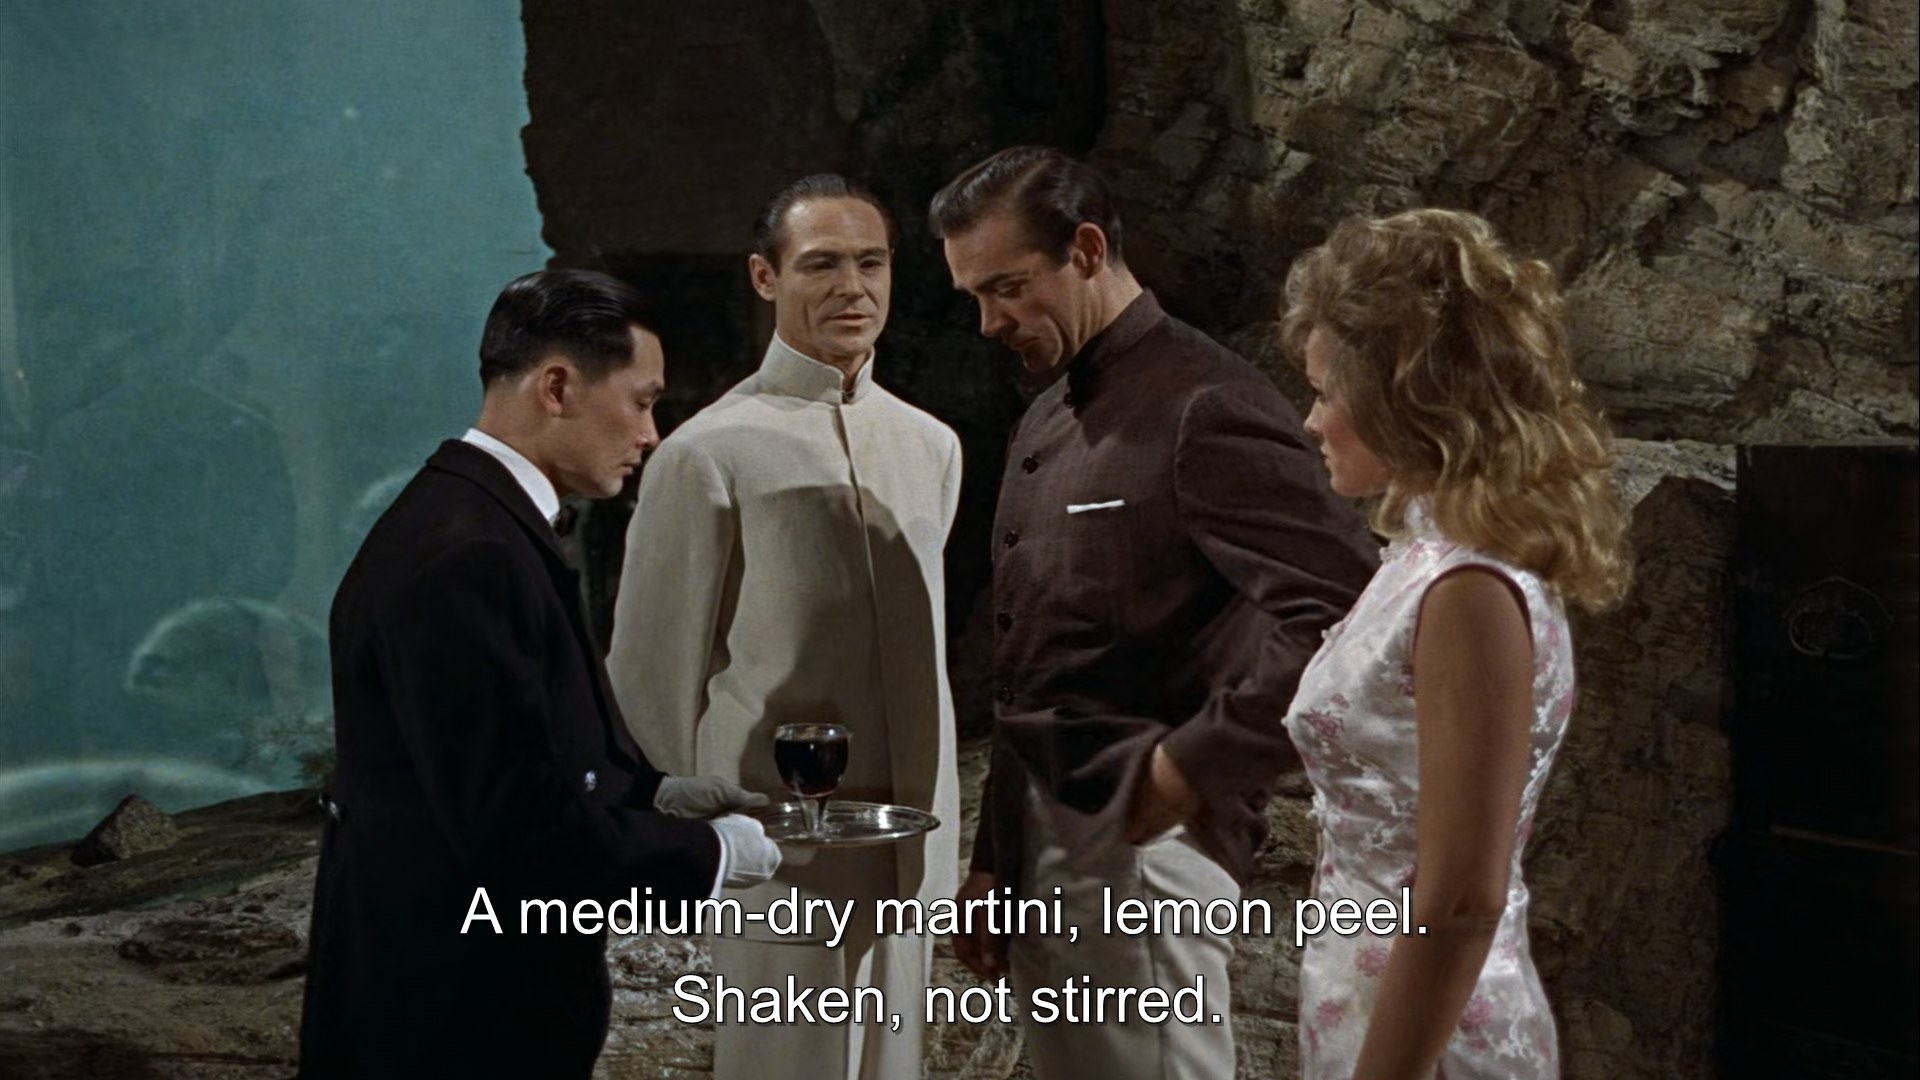 A man serves a cocktail to James Bond while Dr No comments on the contents of the cocktail as Honey Ryder looks at him